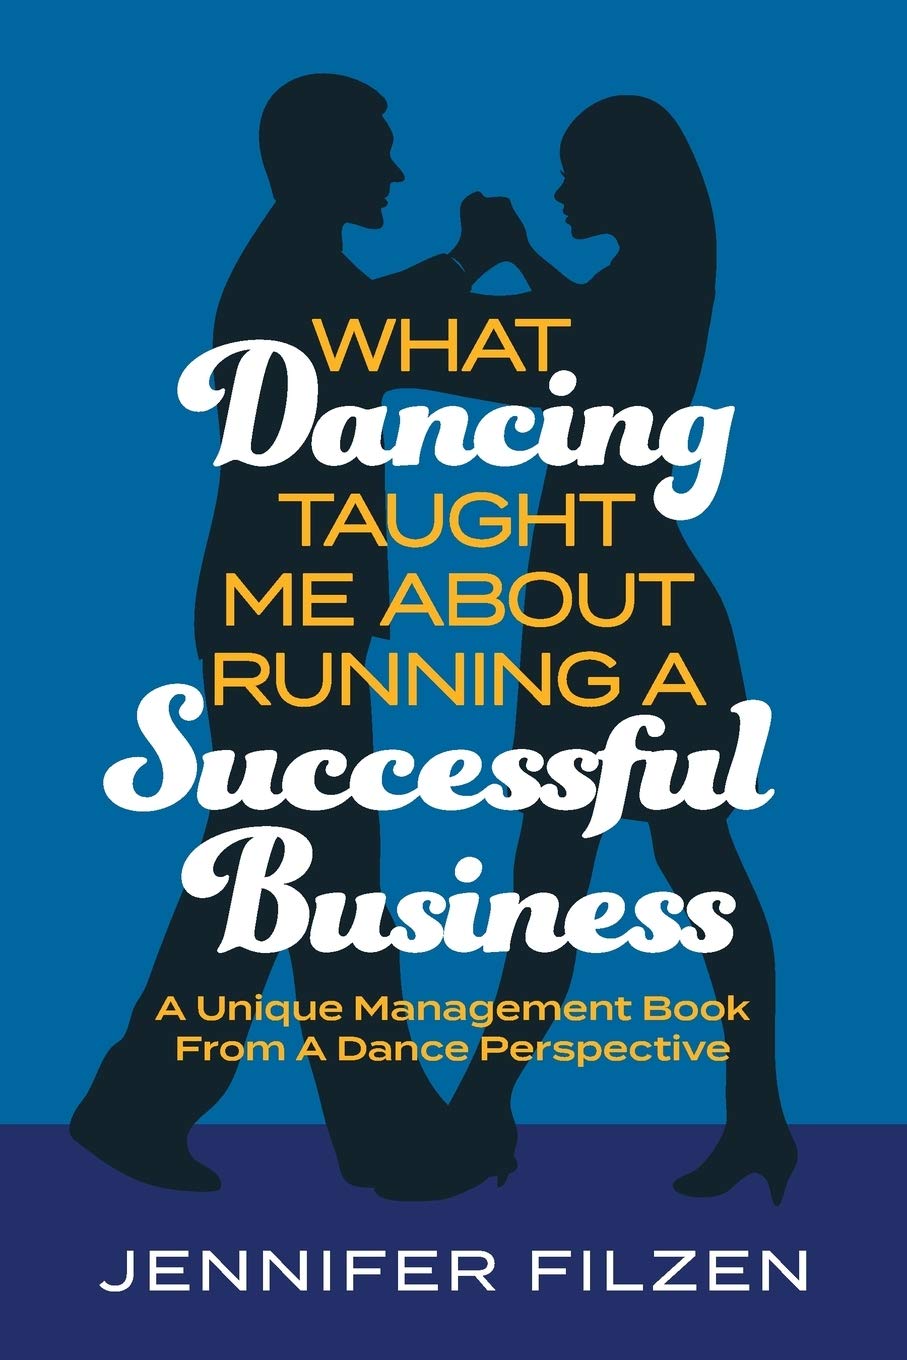 Jennifer Filzen - What Dancing Taught Me About Running A Successful Business. A Unique Management Book From A Dance Perspective